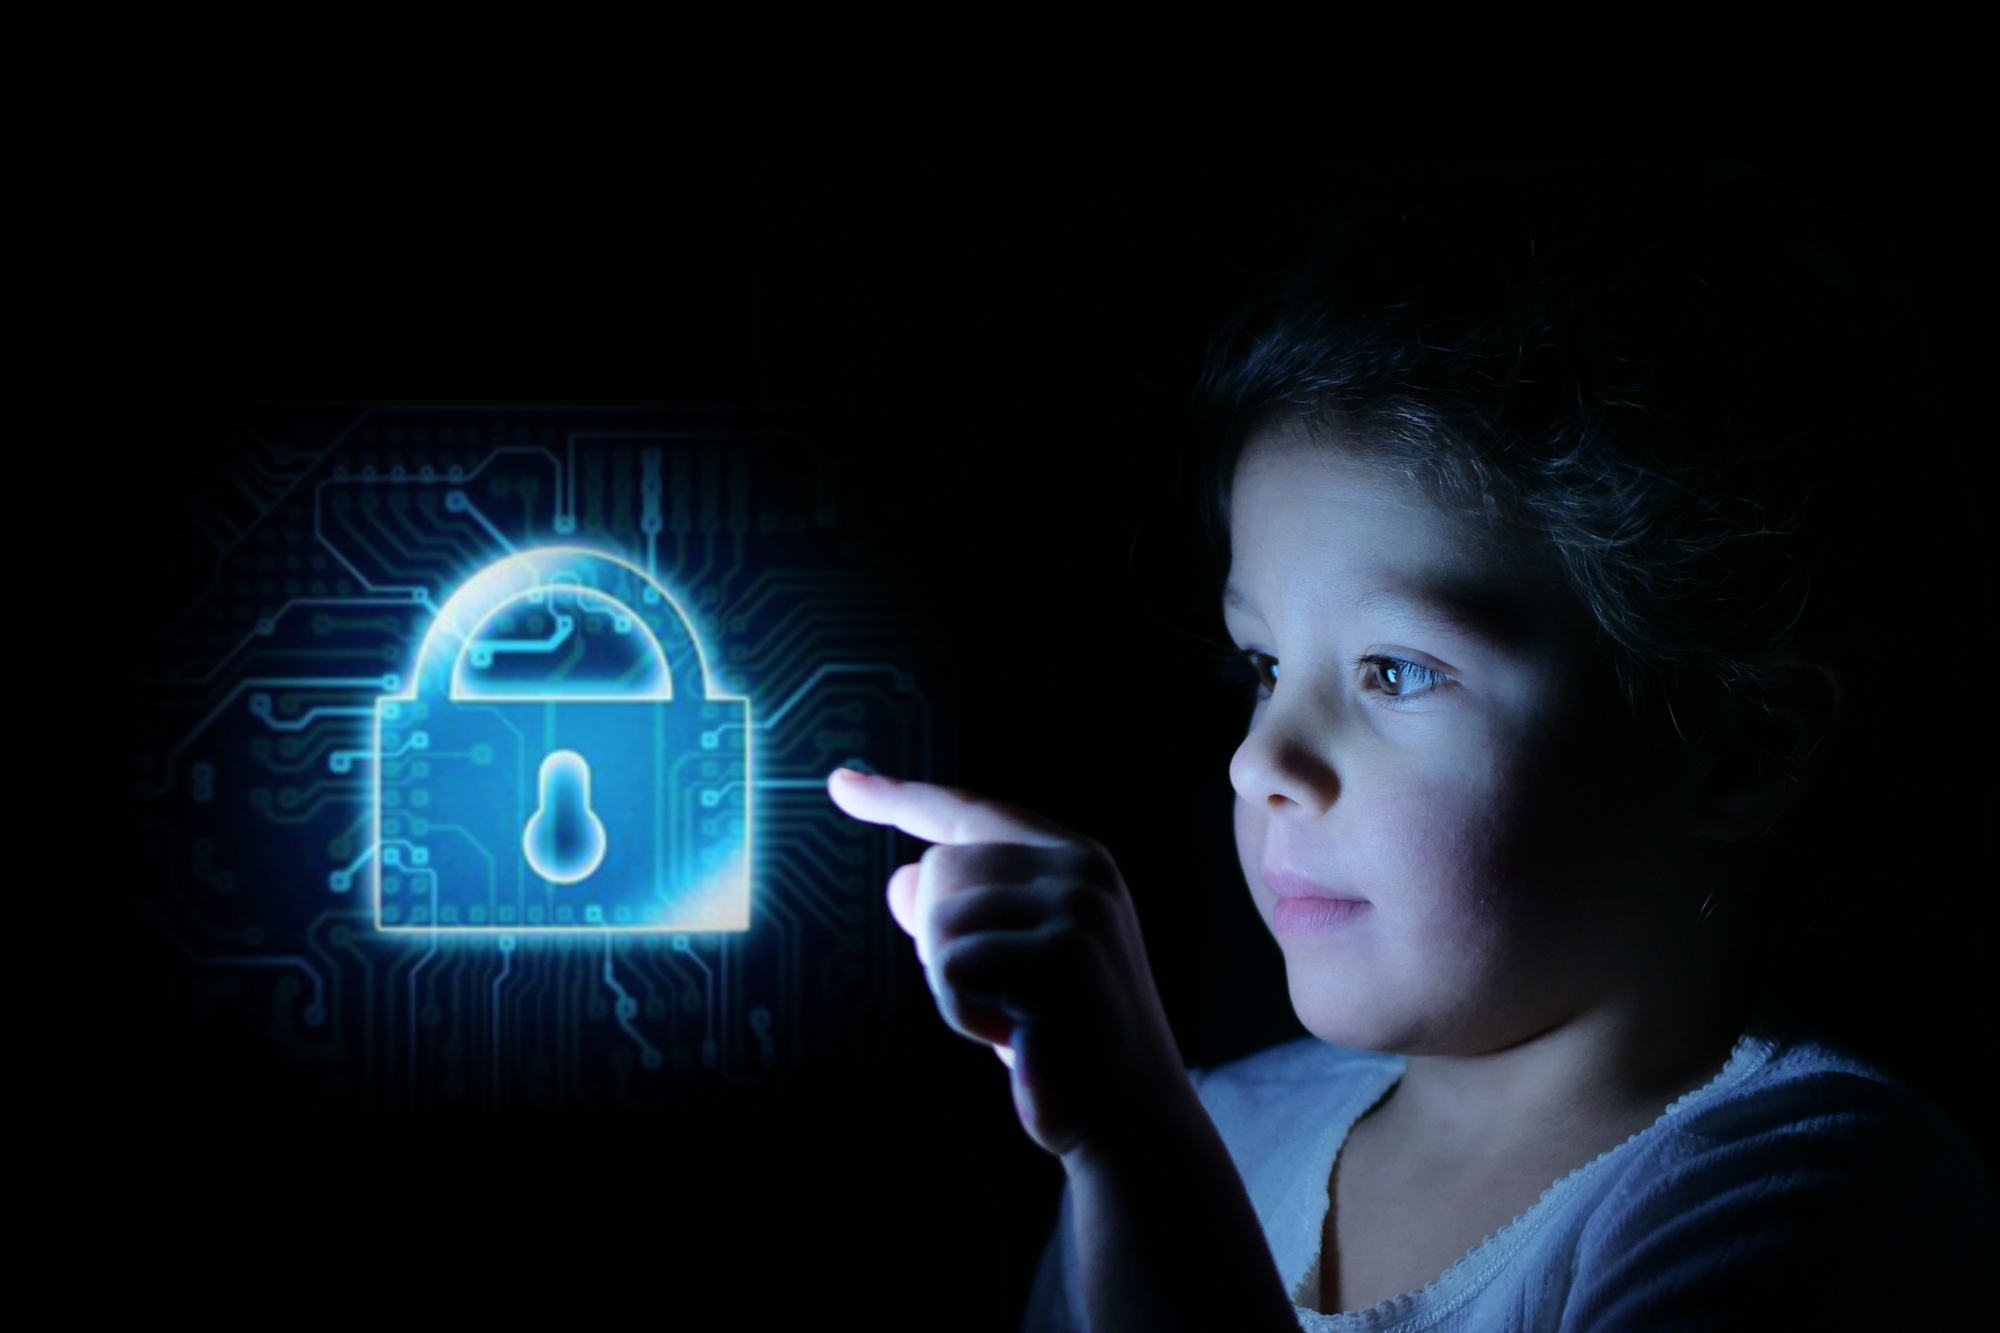 A little girl is pointing at a brightline padlock on a computer screen.